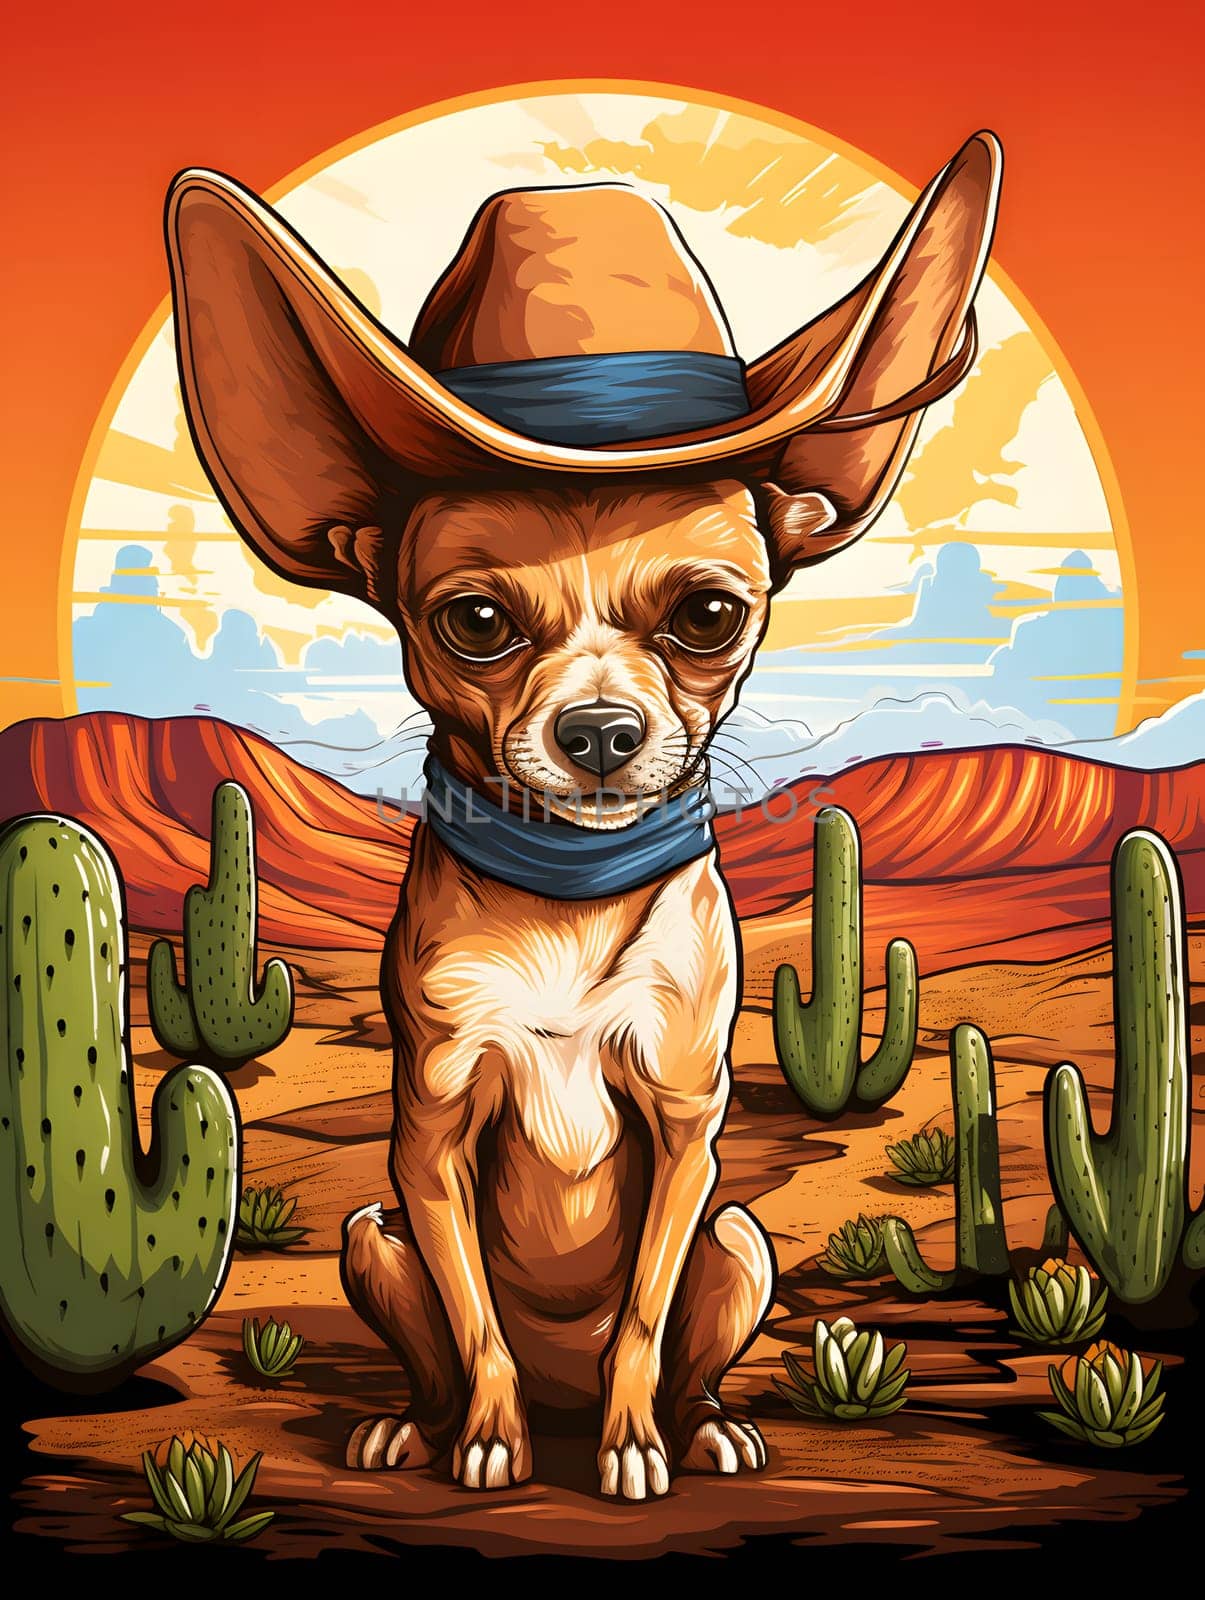 A delightful chihuahua dog steals the spotlight as it proudly dons a cowboy hat and a matching scarf. With a mischievous expression, it captures the imagination and brings a touch of whimsy to any setting.